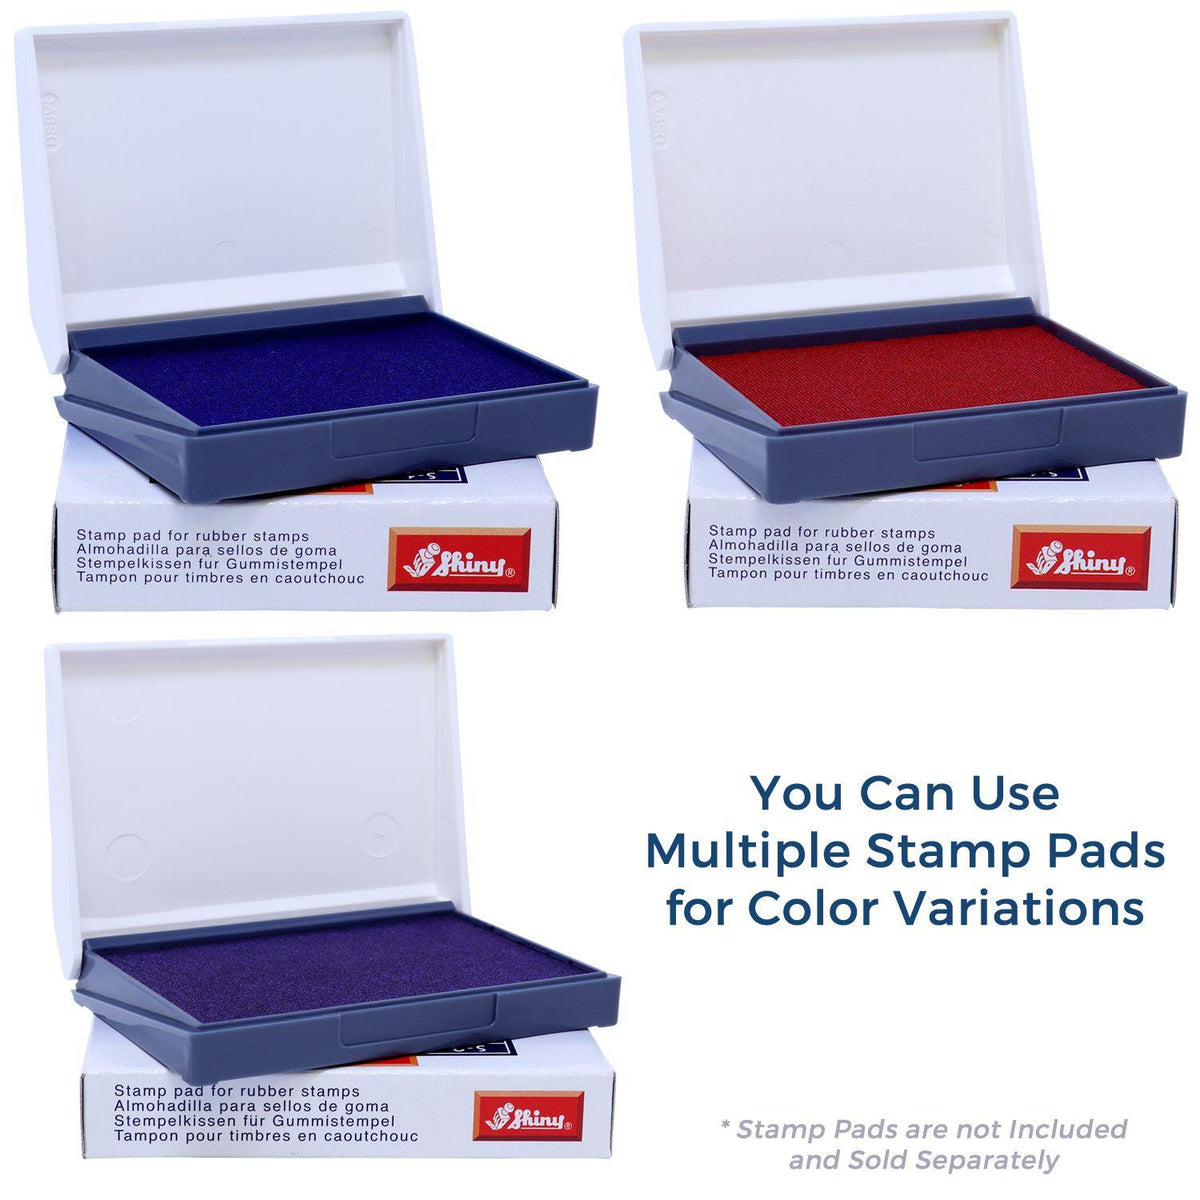 Stamp Pads for Large Exhibit Rubber Stamp Available